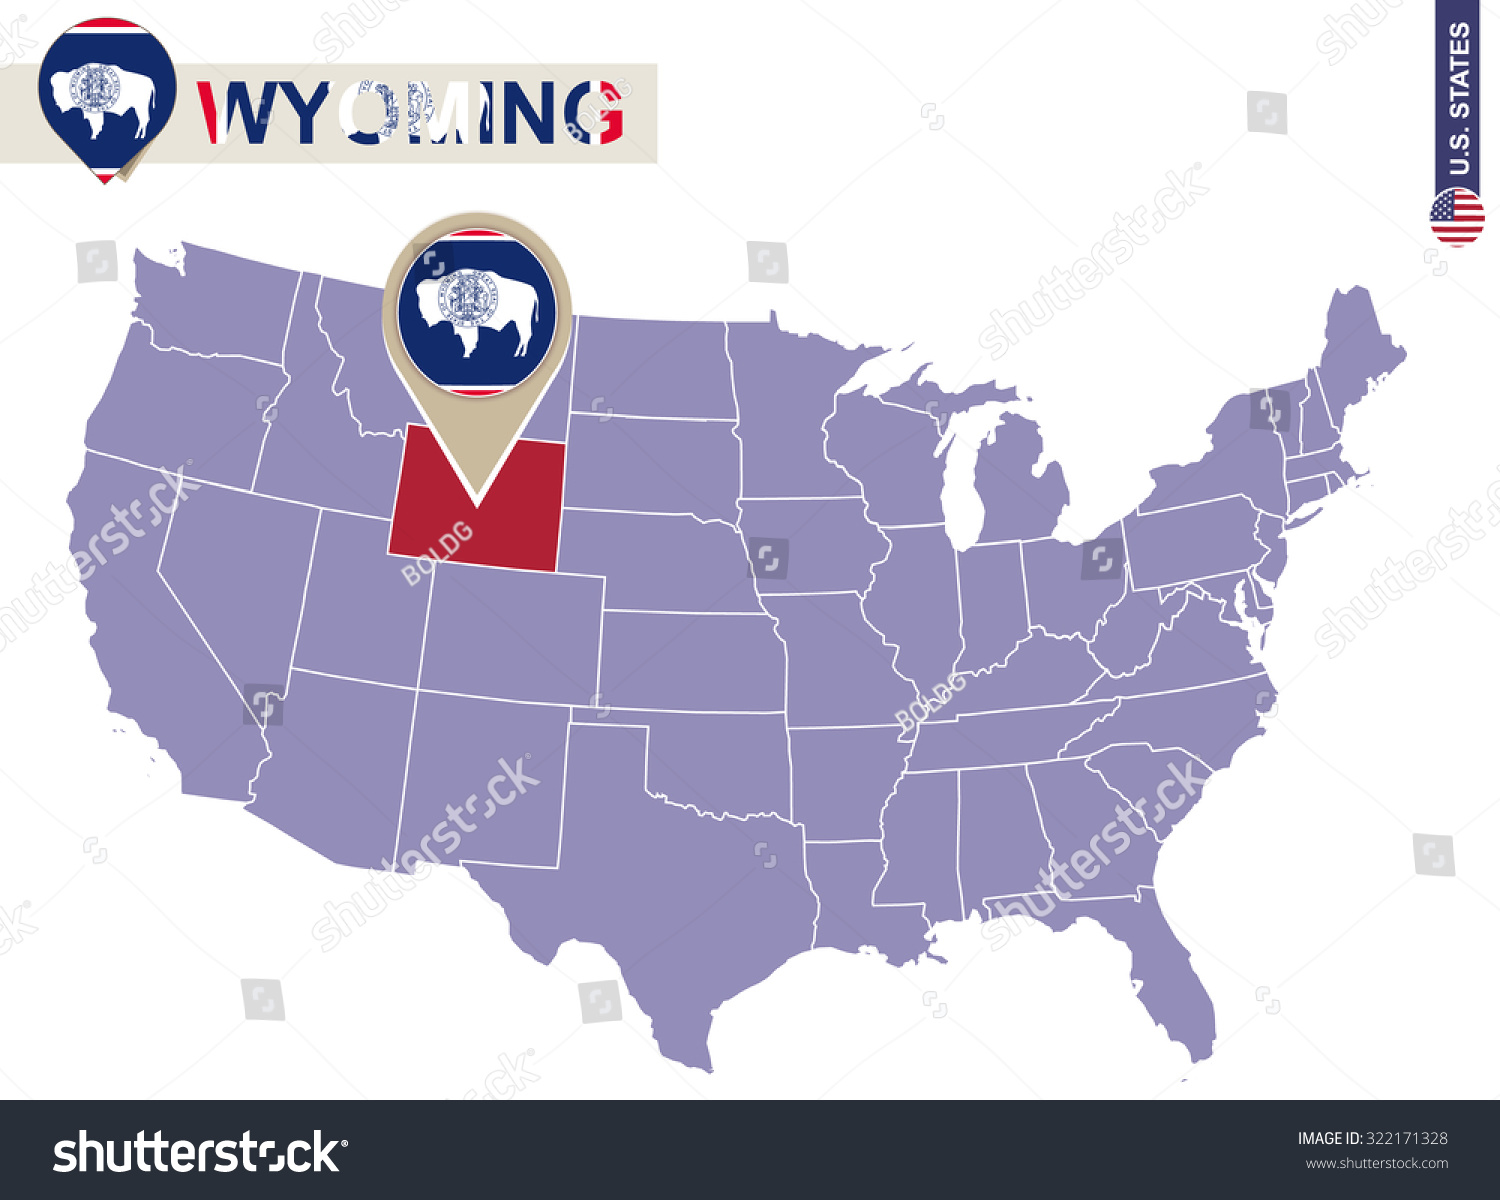 Wyoming State On Usa Map Wyoming Stock Vector Royalty Free 322171328